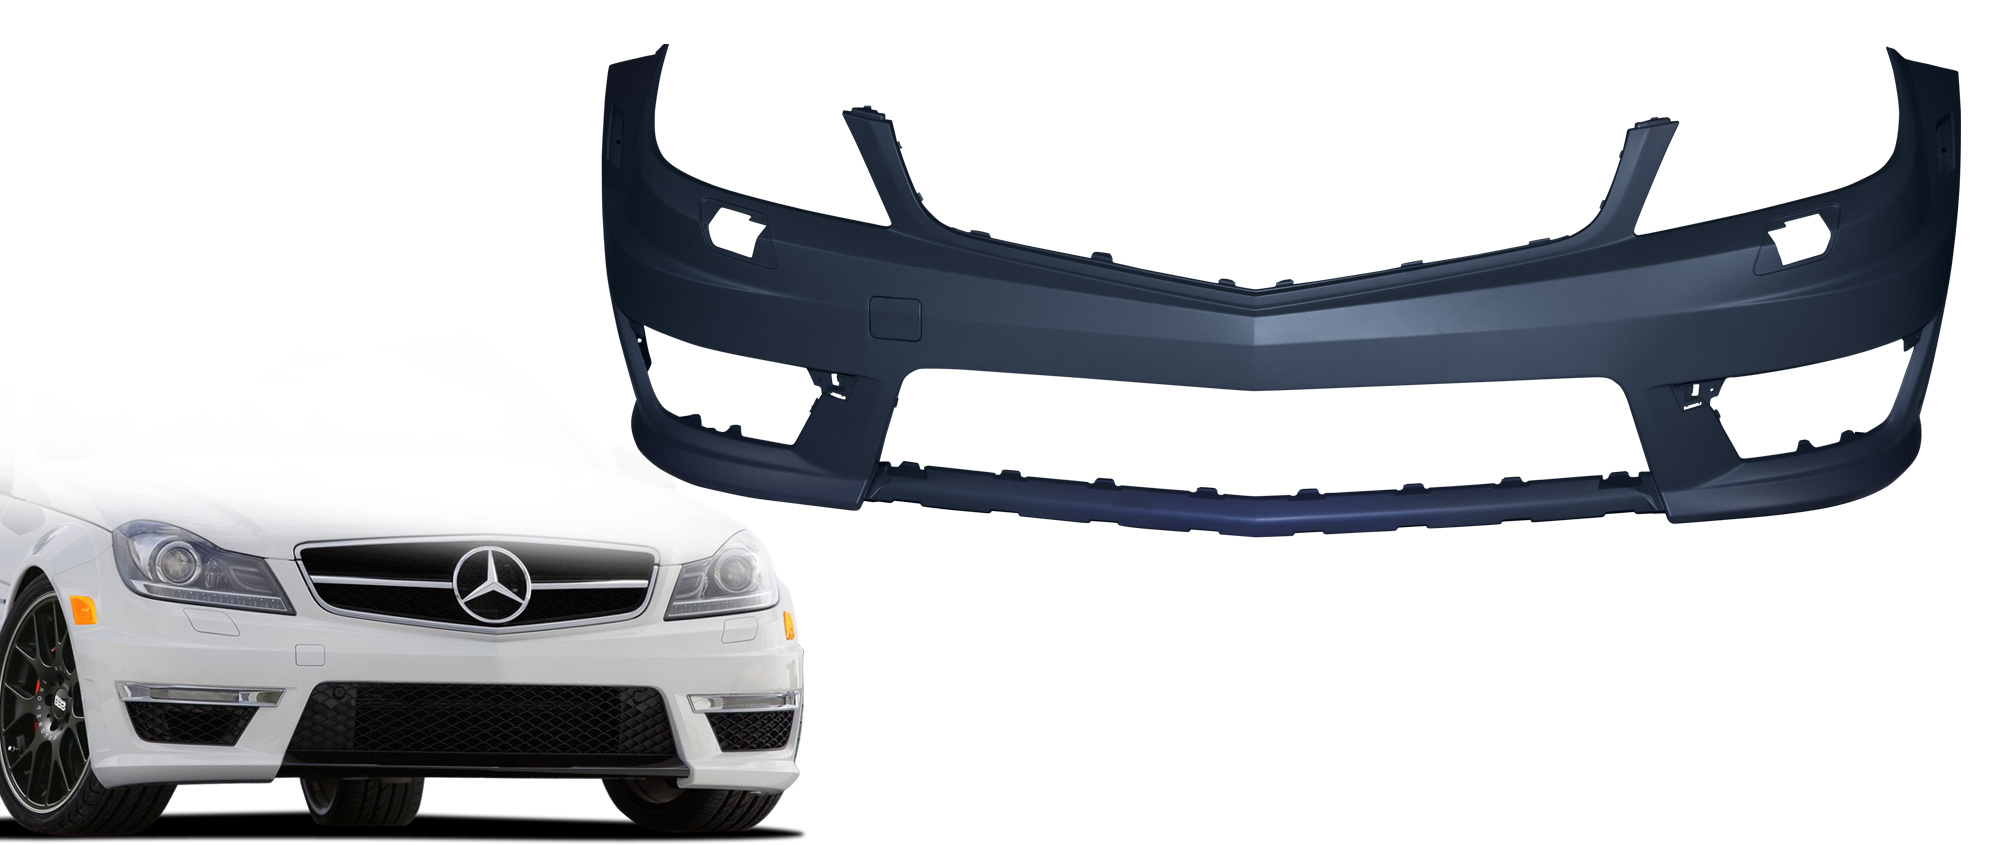 Polypropylene Front Bumper Bodykit for 2014 Mercedes C Class ALL - Mercedes C Class W204 Vaero C63 Look Conversion Front Bumper Cover ( without PDC )